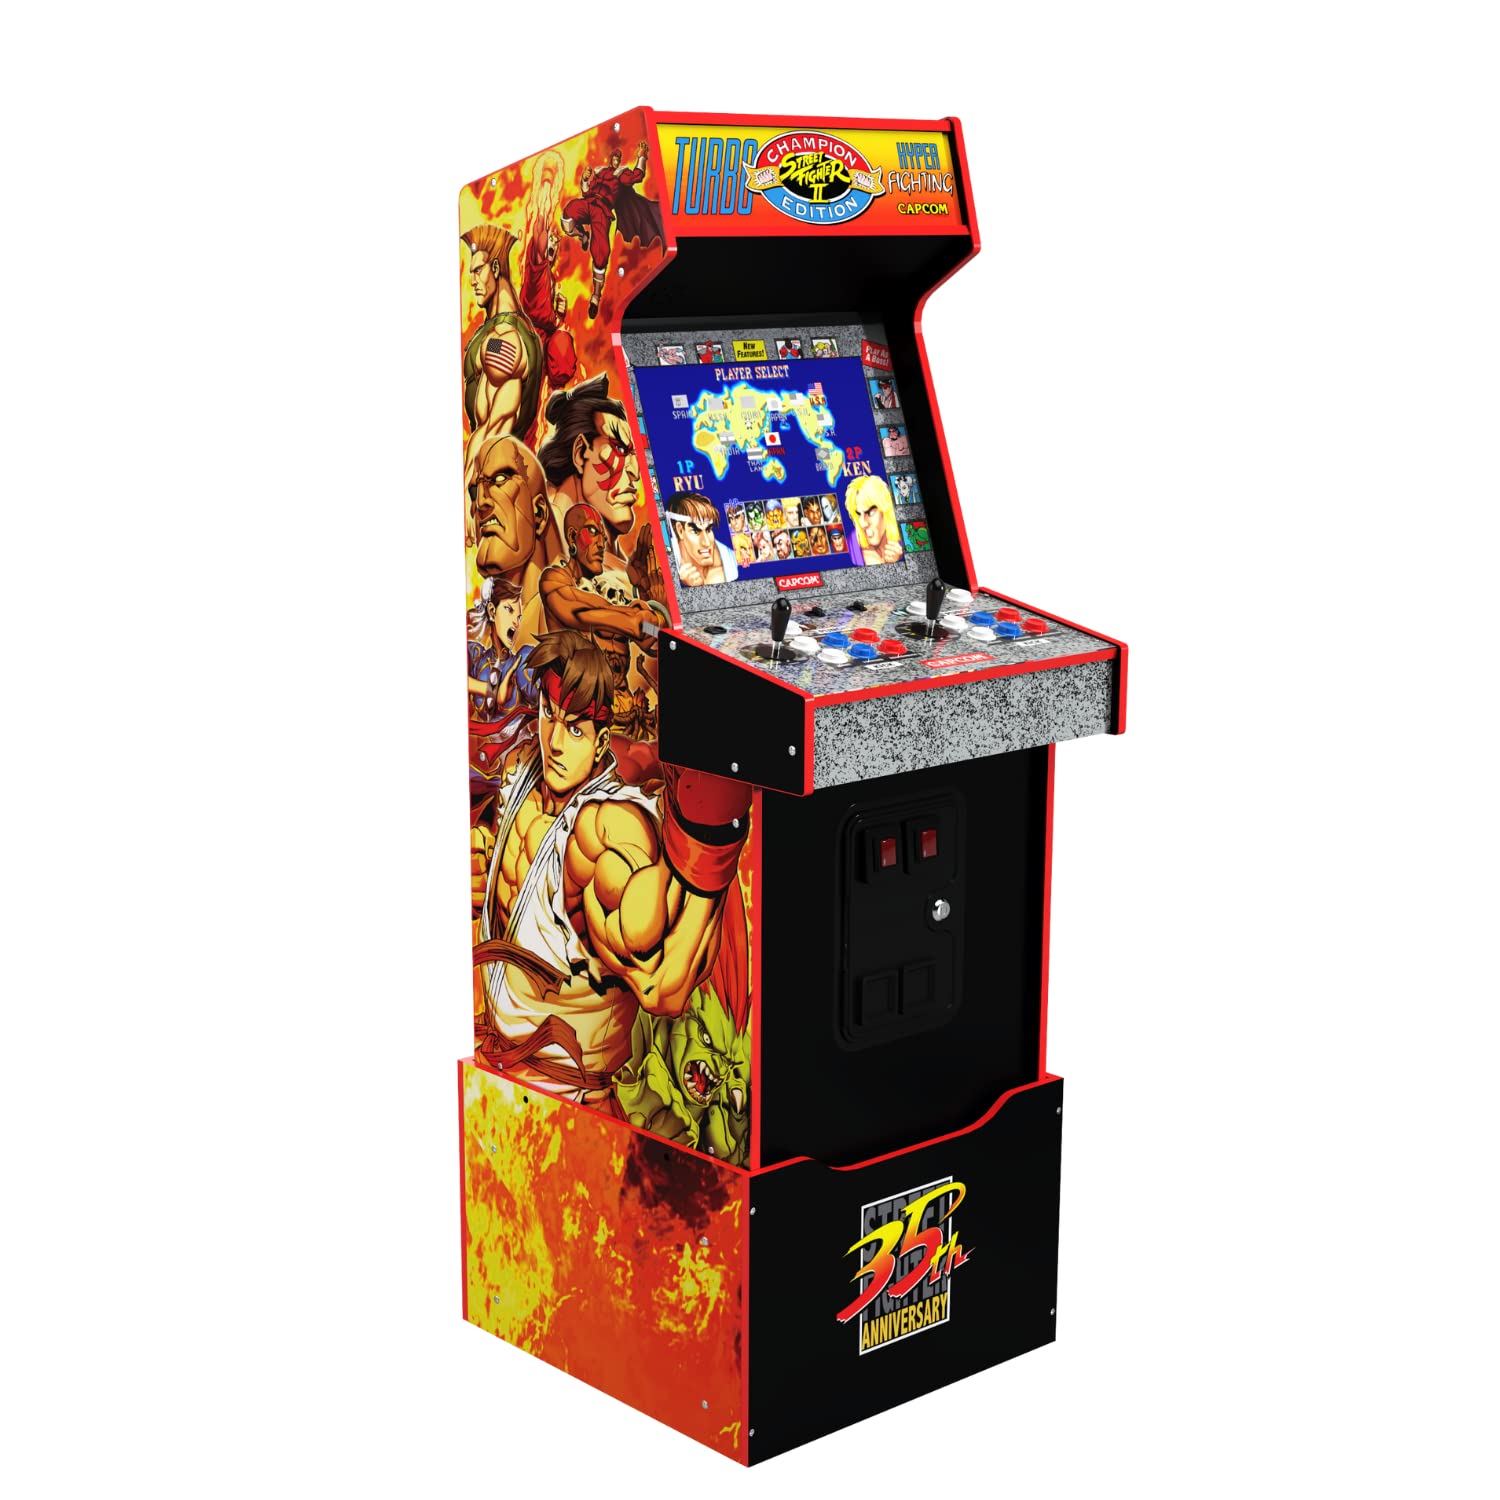 ARCADE1UP Capcom Street Fighter II Champion Turbo Legacy Edition Arcade Game Machine with Riser, Red, Large & BANDAI NAMCO Legacy Arcade Game Ms. PAC-Man™ Edition – Arcade Machine - 17 Classic Games